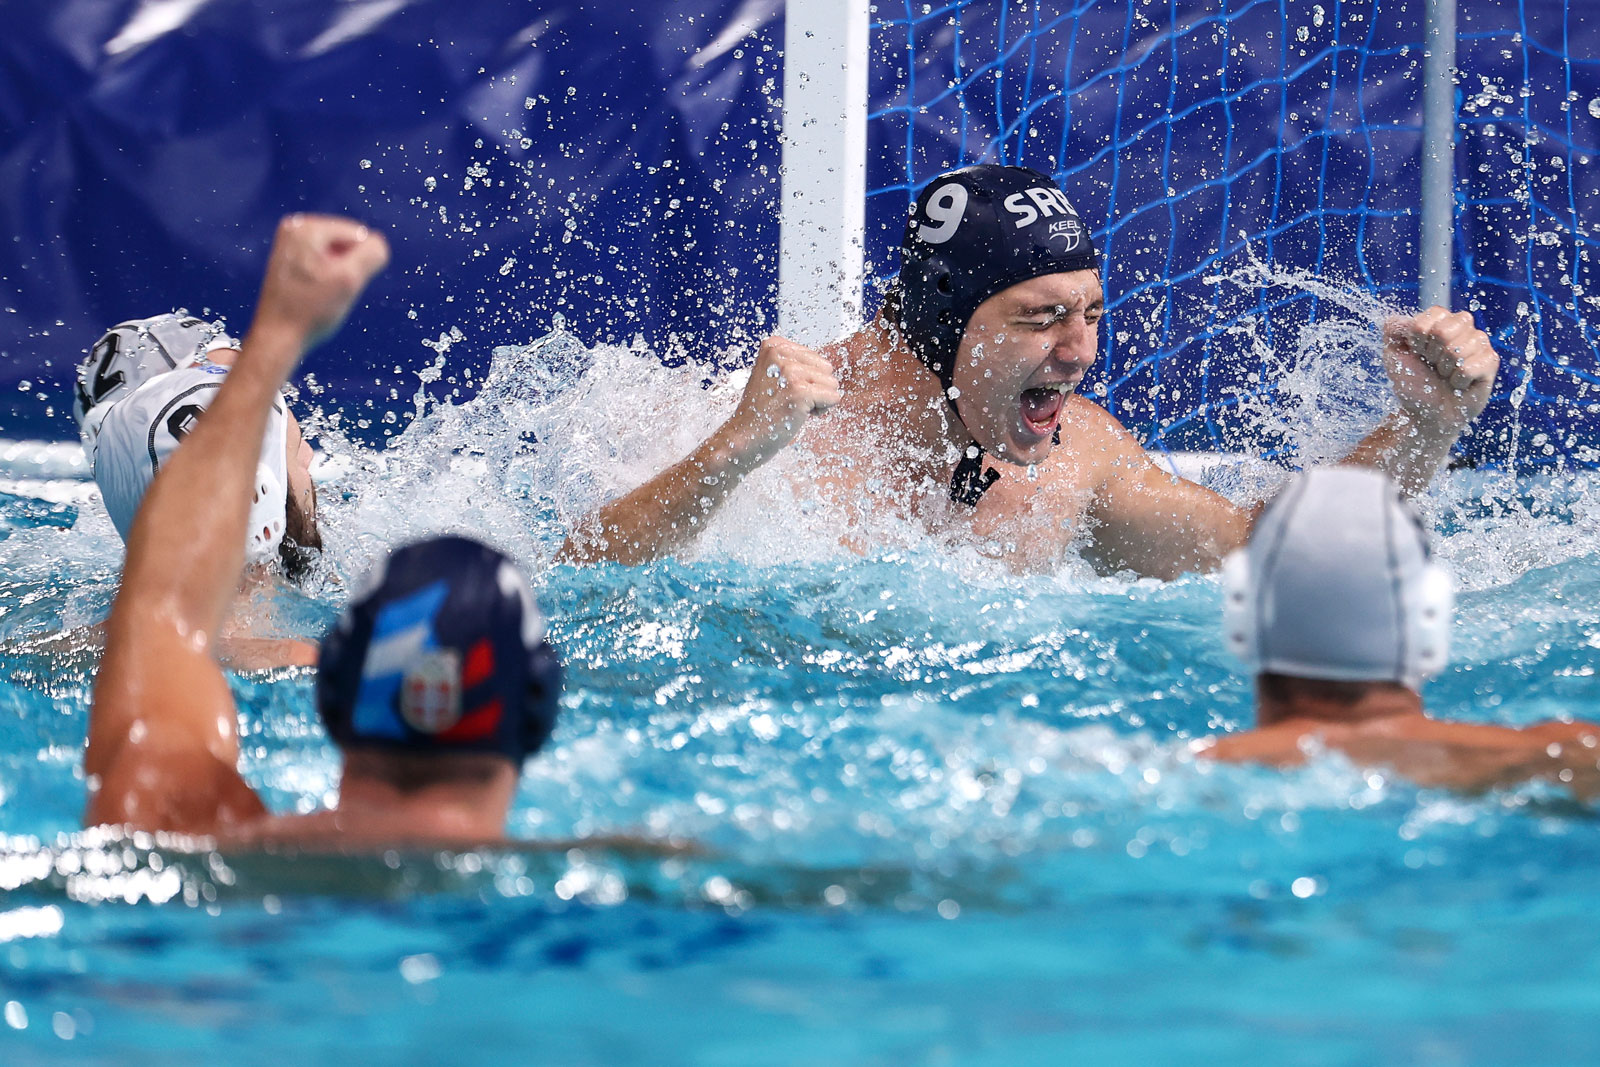 18) Serbia men's water polo team wins the final gold medal at Tokyo 2020